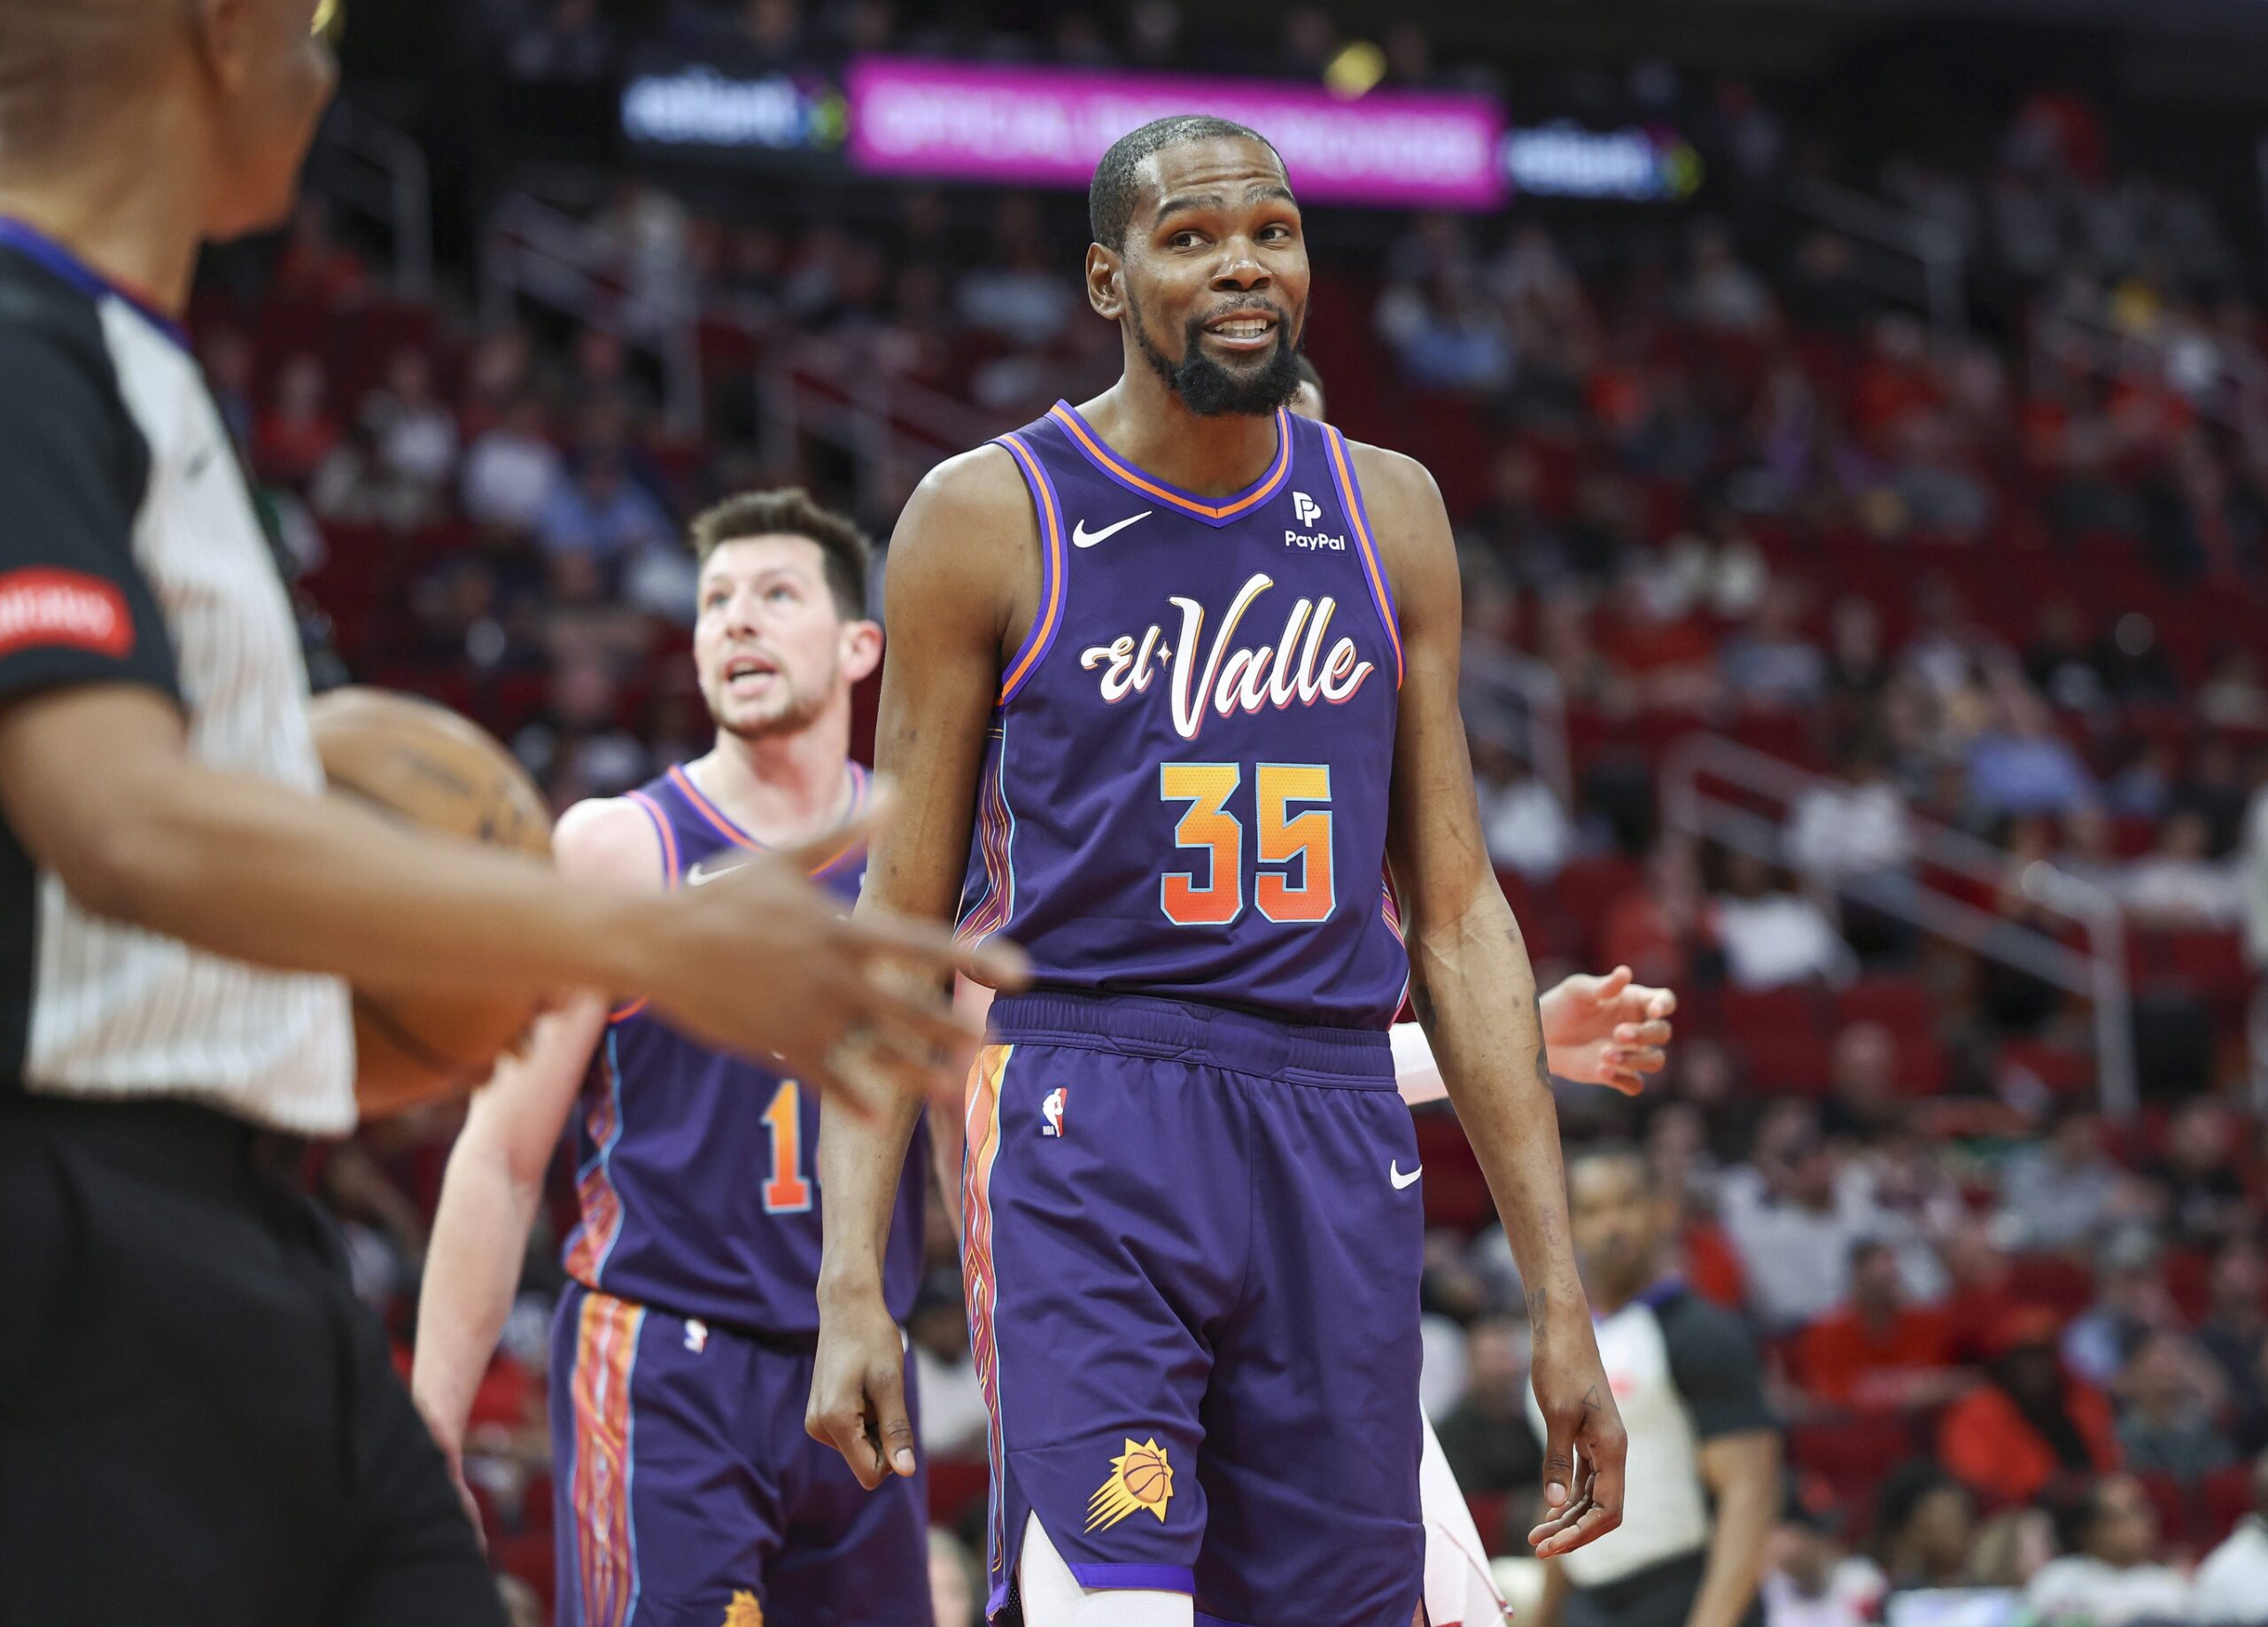 Phoenix Suns forward Kevin Durant (35) reacts after a play during the first quarter against the Houston Rockets at Toyota Center.